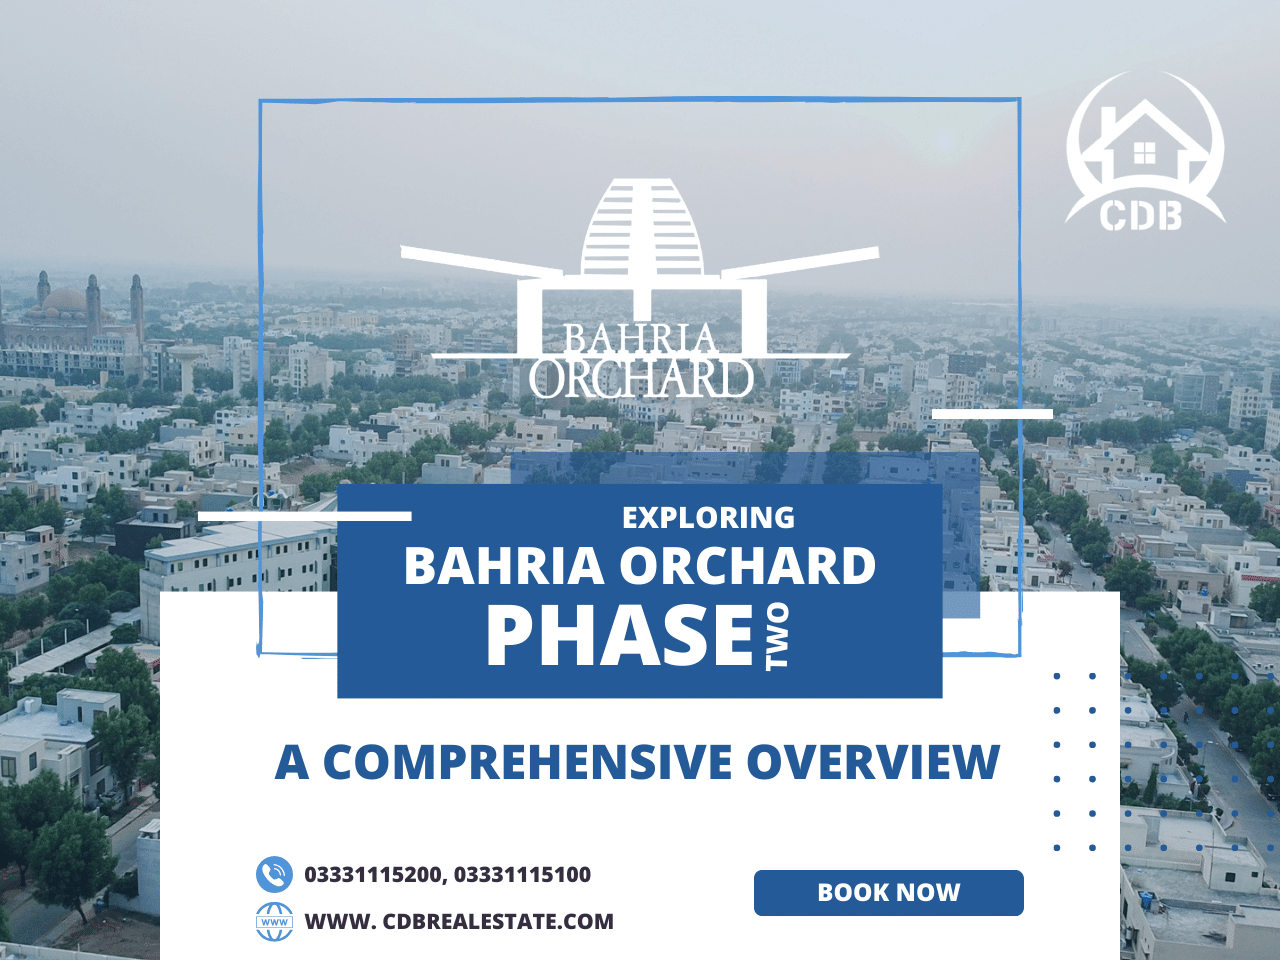 Bahria Orchard Phase 2 Comprehensive Overview